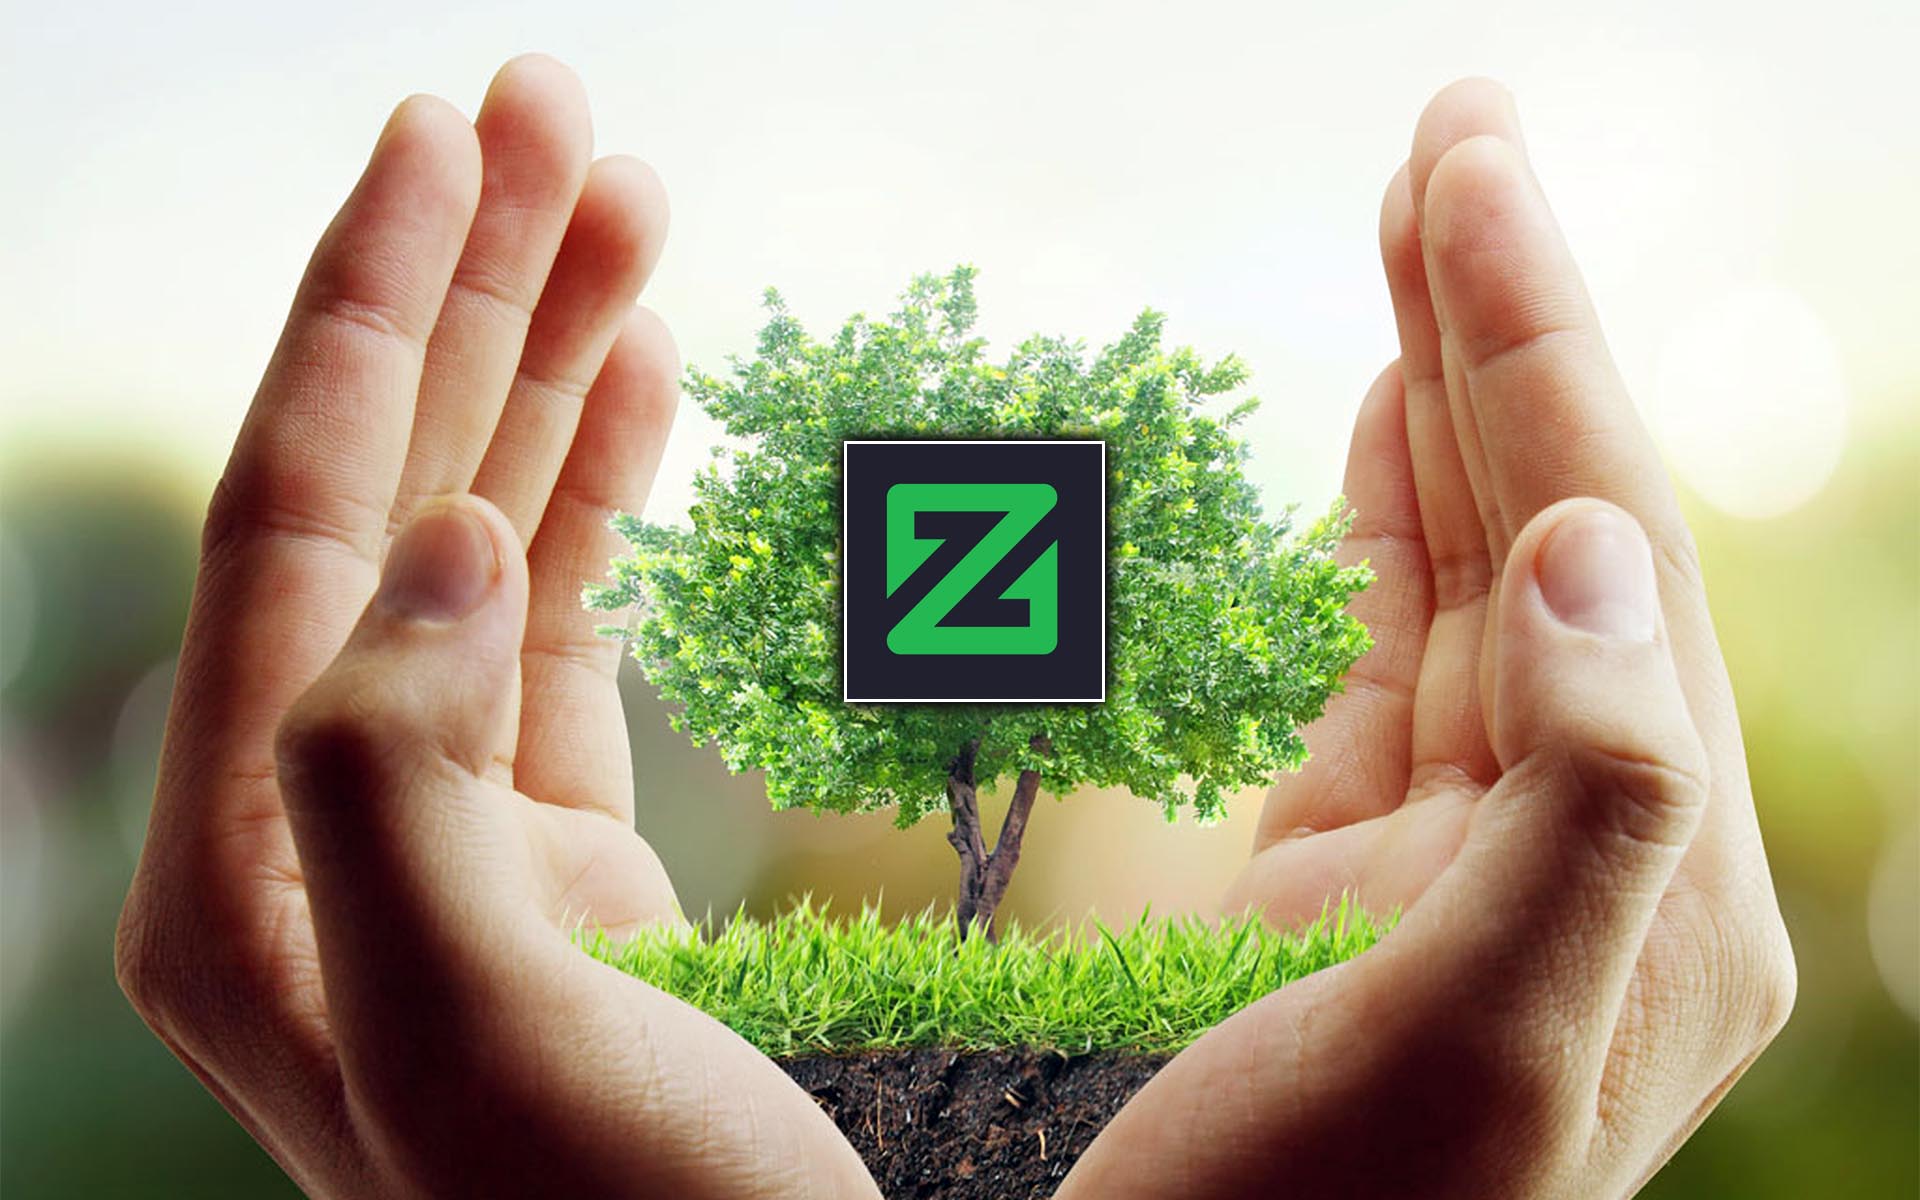 Zcoin Achieves First Ever Implementation of Merkle Tree Proof to Solve Miner Centralization Imbalance